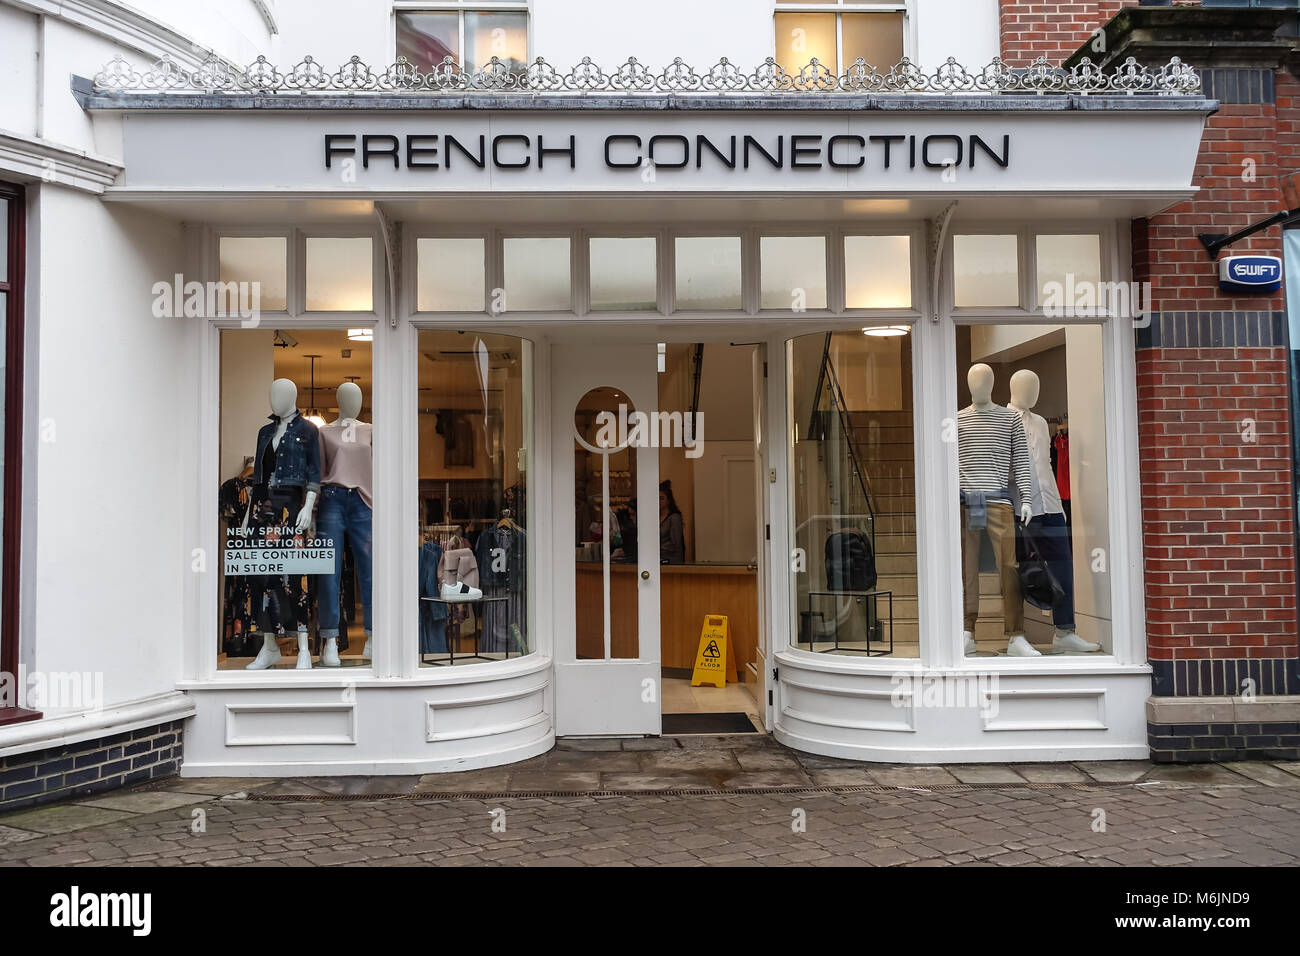 A view of the French Connection clothing shore on Windsor, UK. Stock Photo